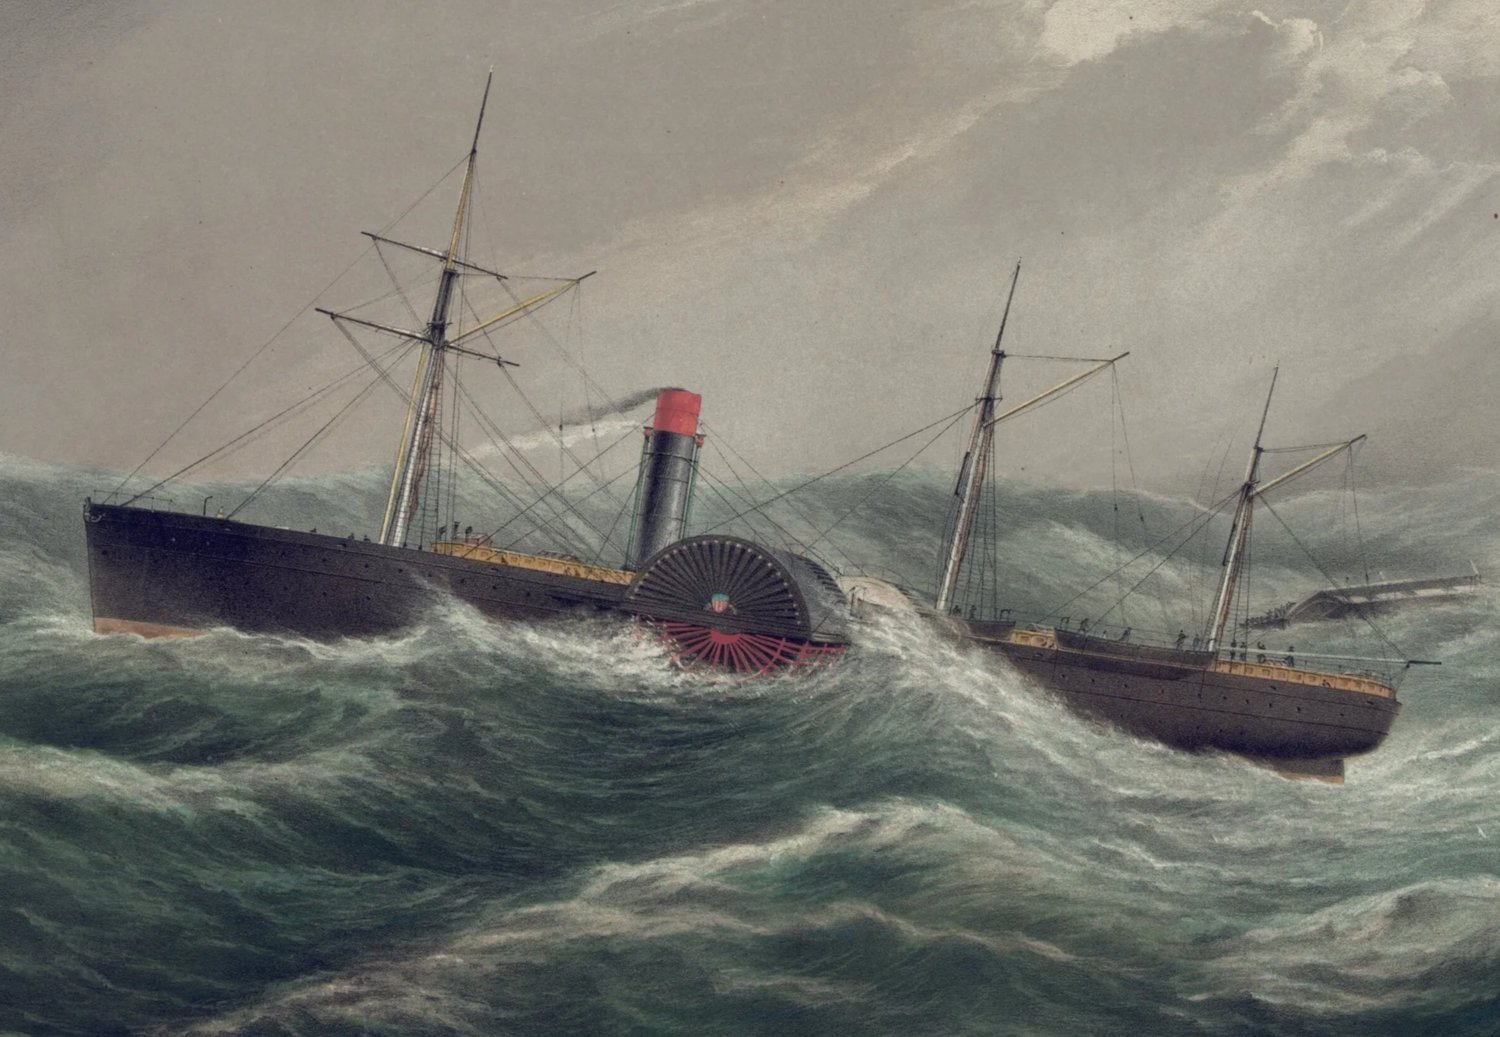 A lithograph by Day & Son shows the steamship SS Pacific rescuing the crew of another ship during a heavy gale in December 1852. (Library of Congress)